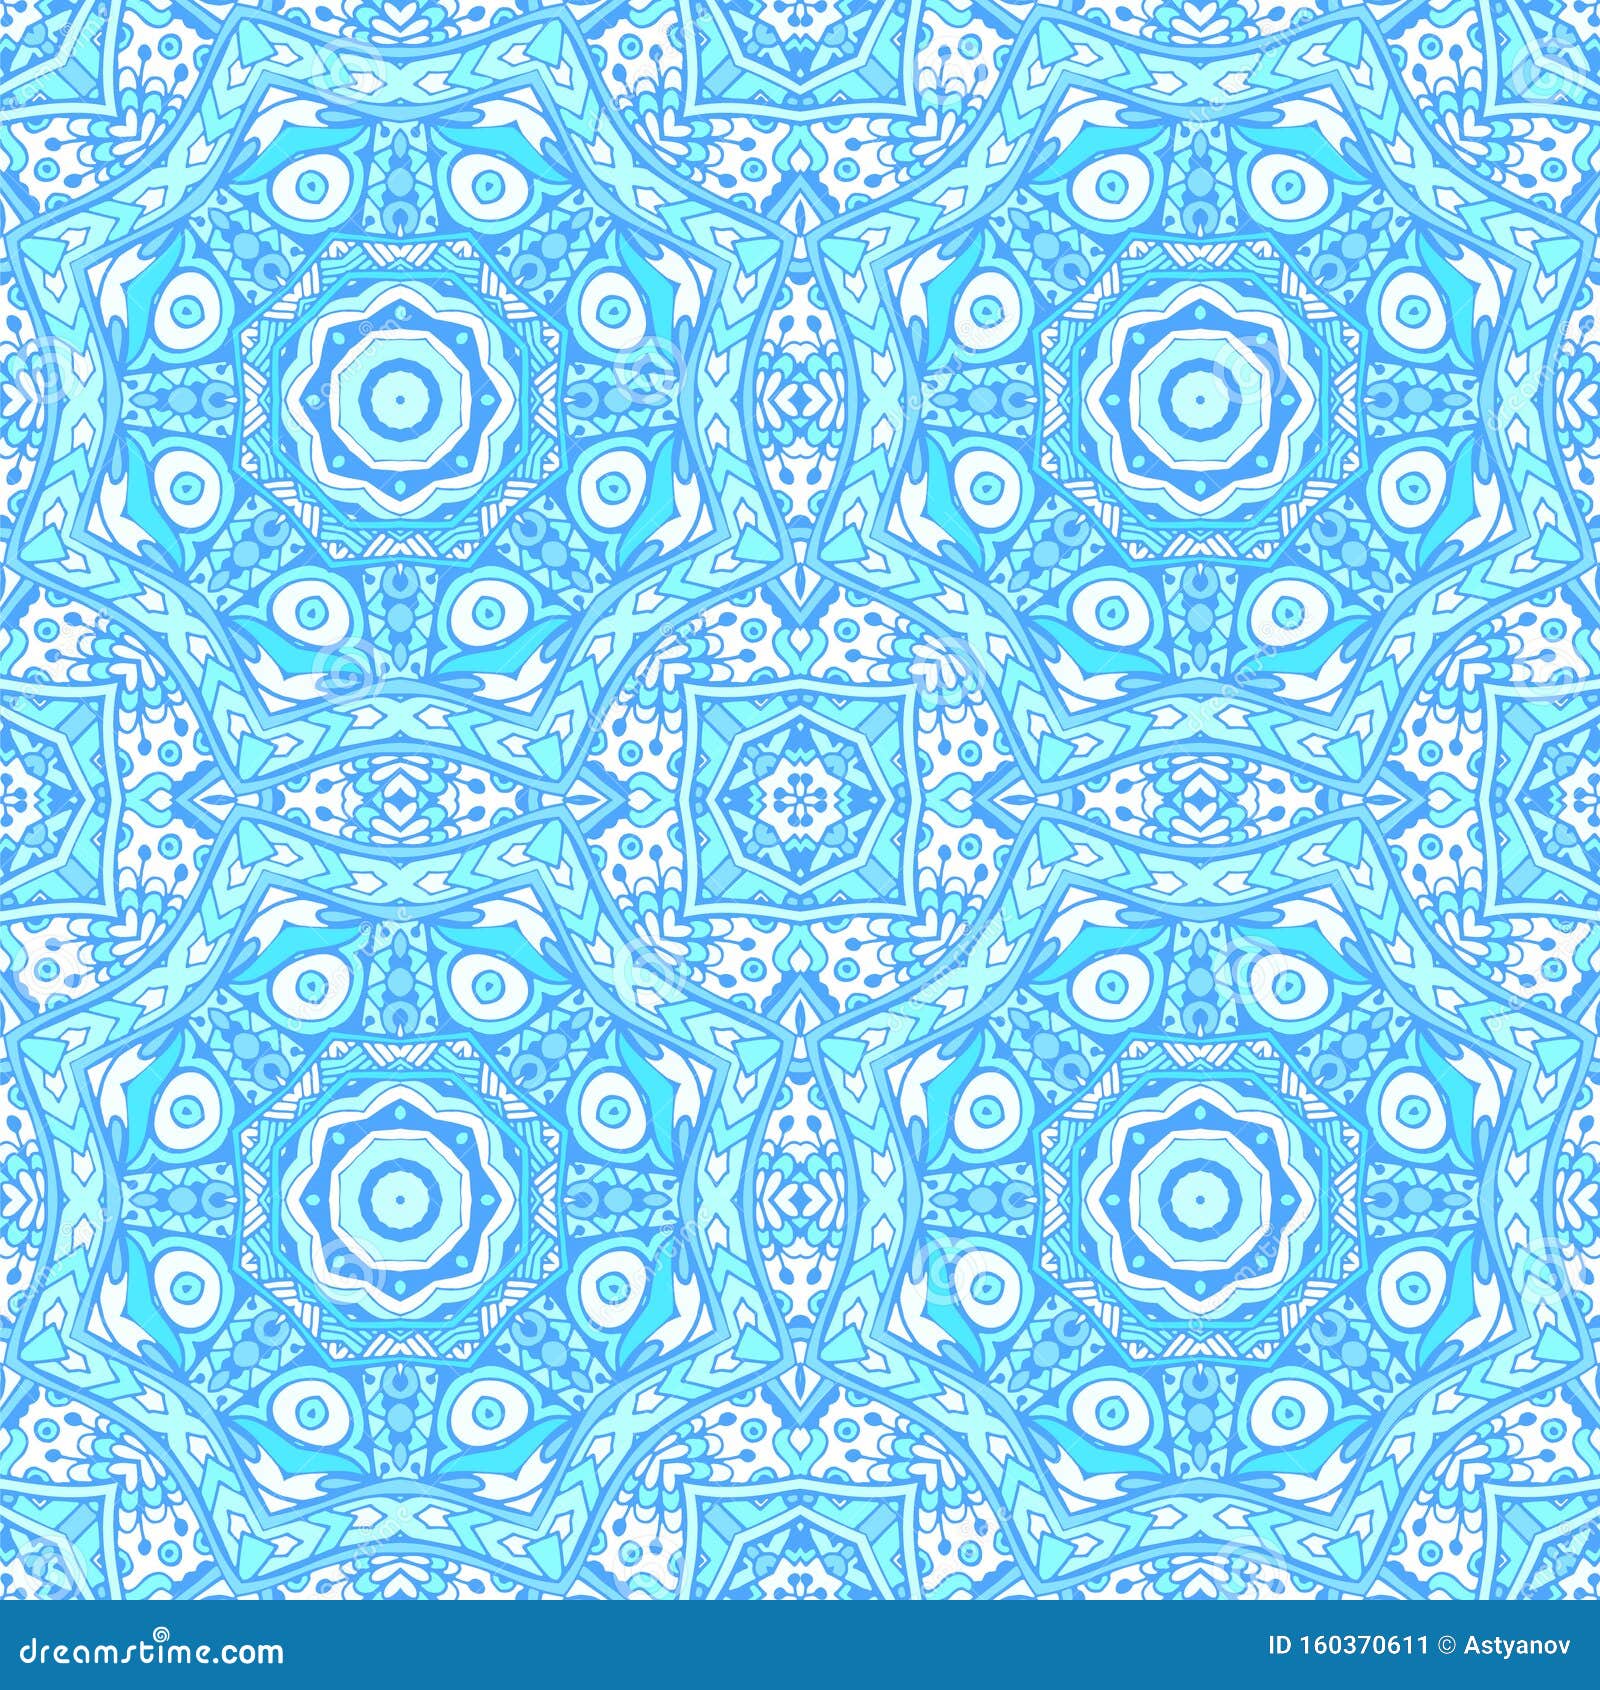 Seamless Arabesque Pattern From Blue And White Oriental Tiles, Ornaments Stock